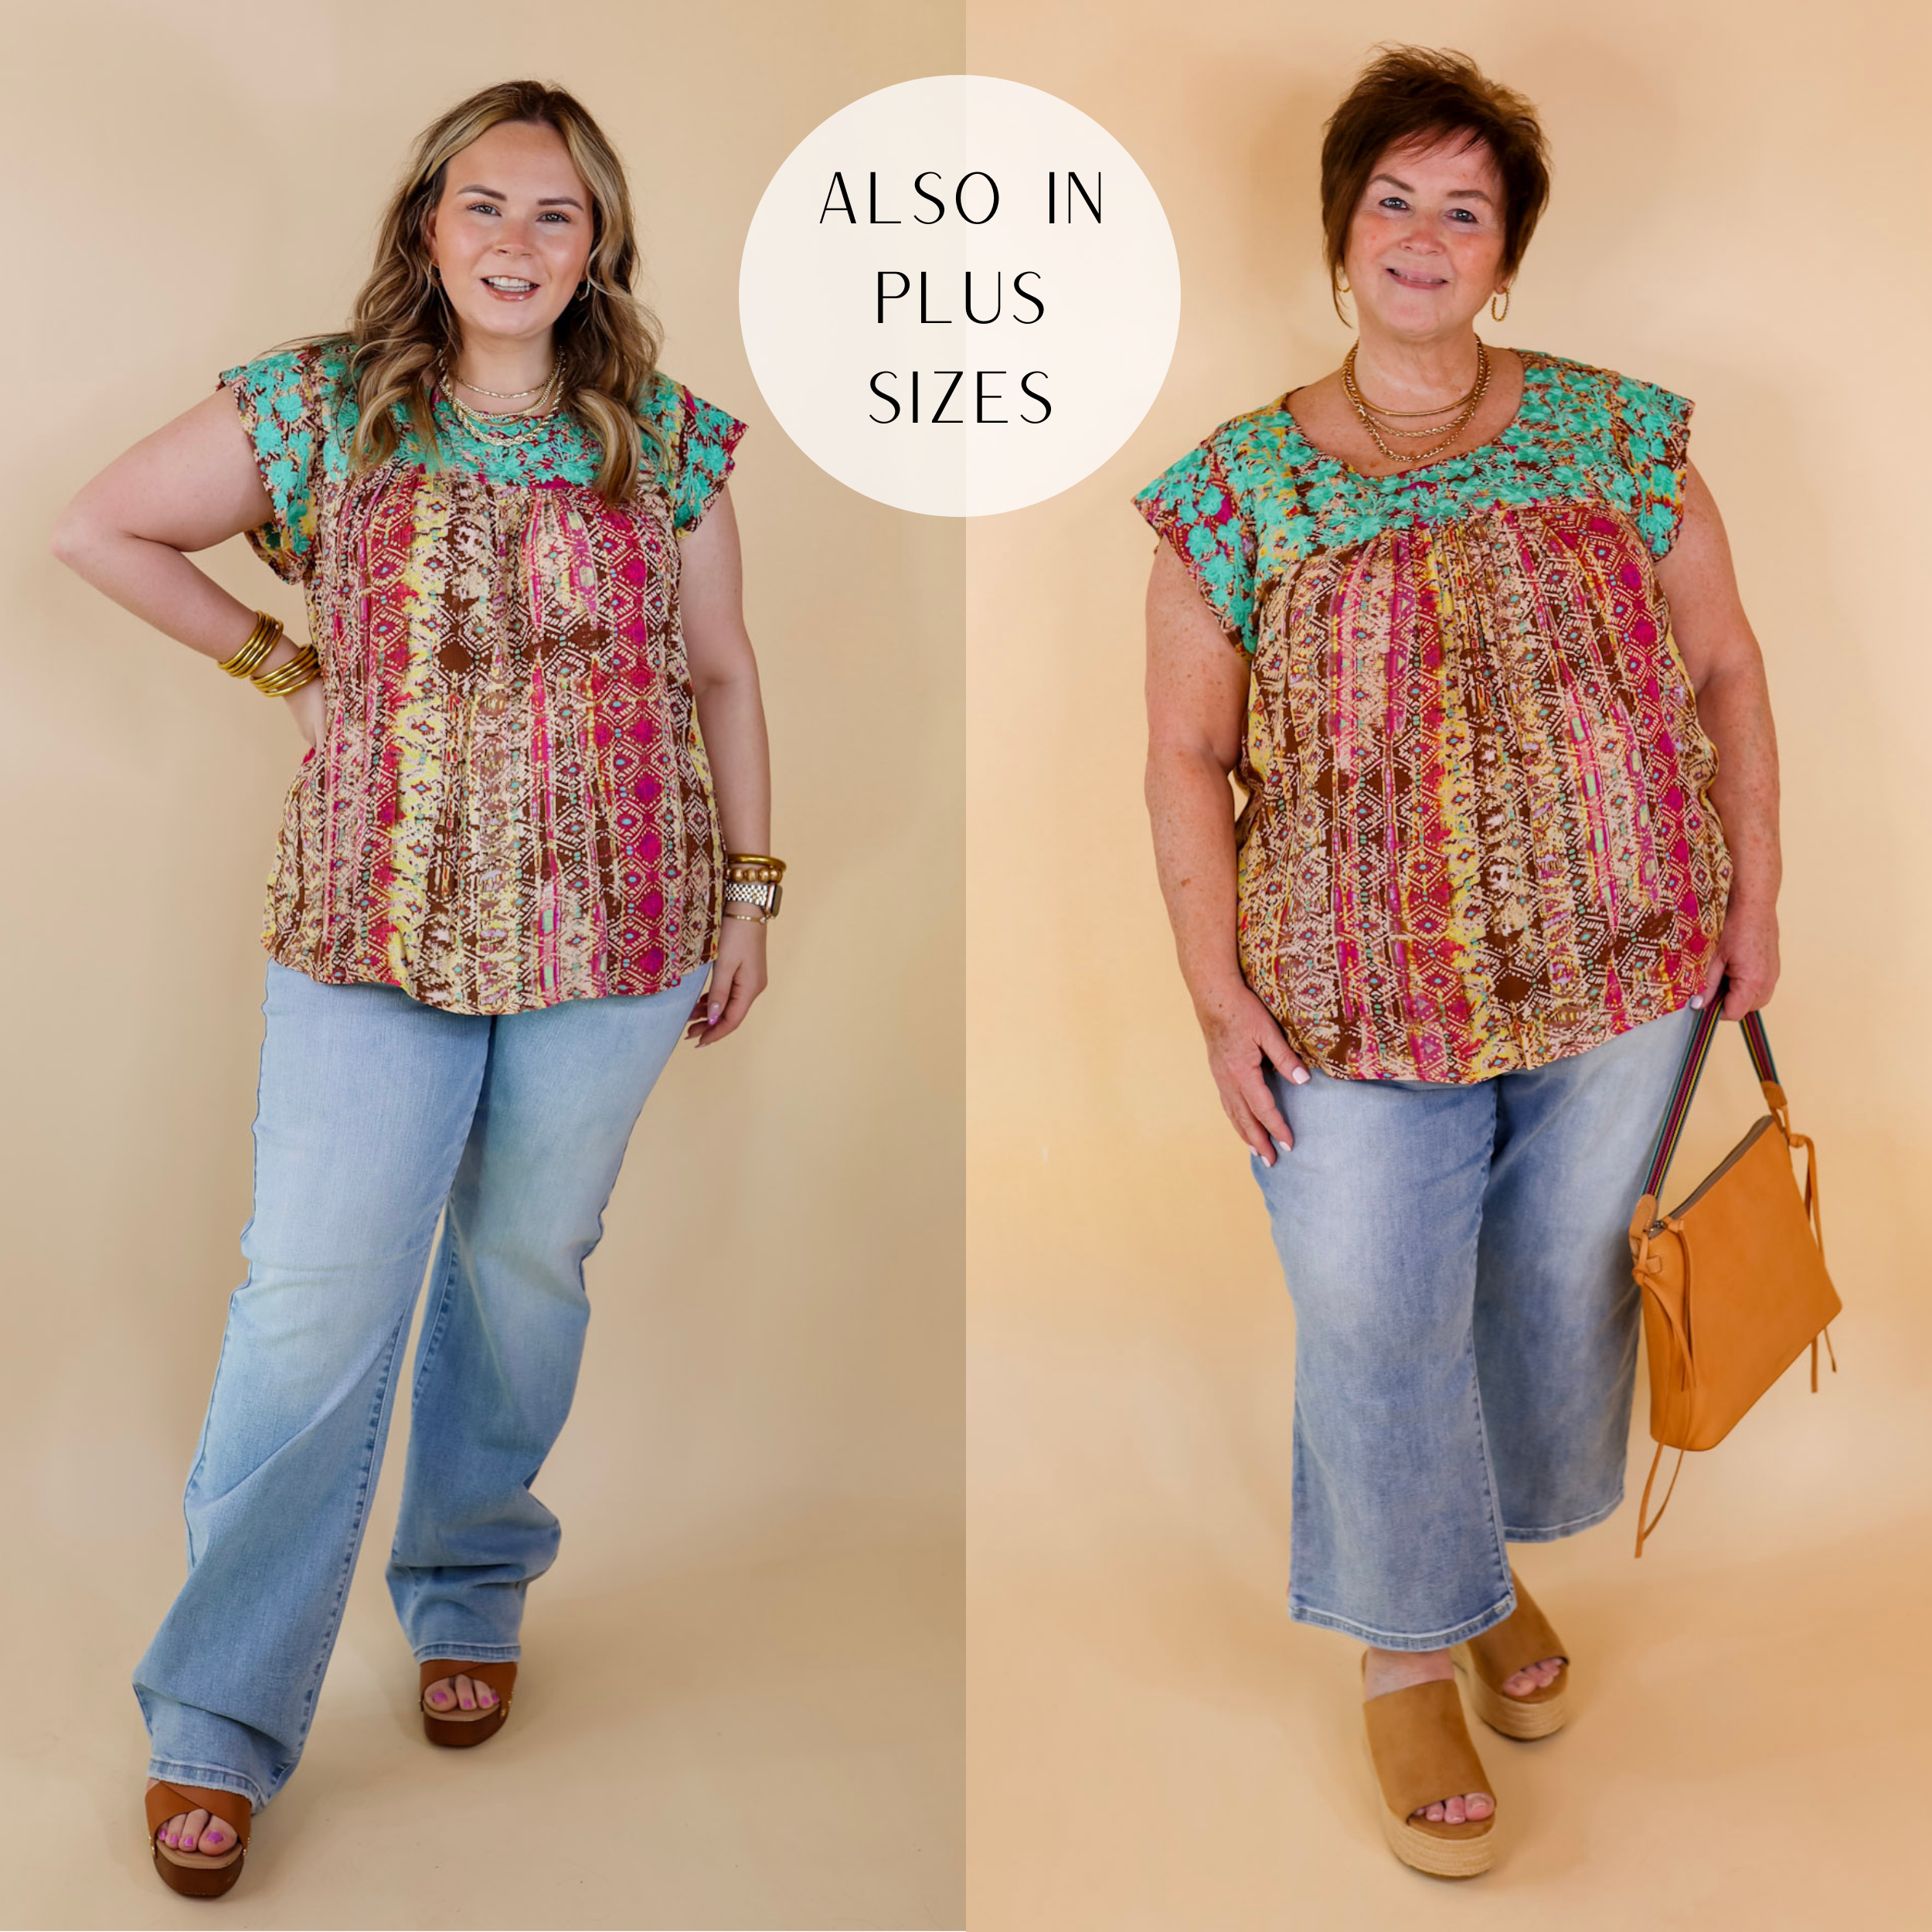 Model is wearing a tribal print blouse with ruffle cap sleeves and turquoise floral embroidery around the upper. Model has it paired with wide leg jeans, tan wedges, and gold jewelry.